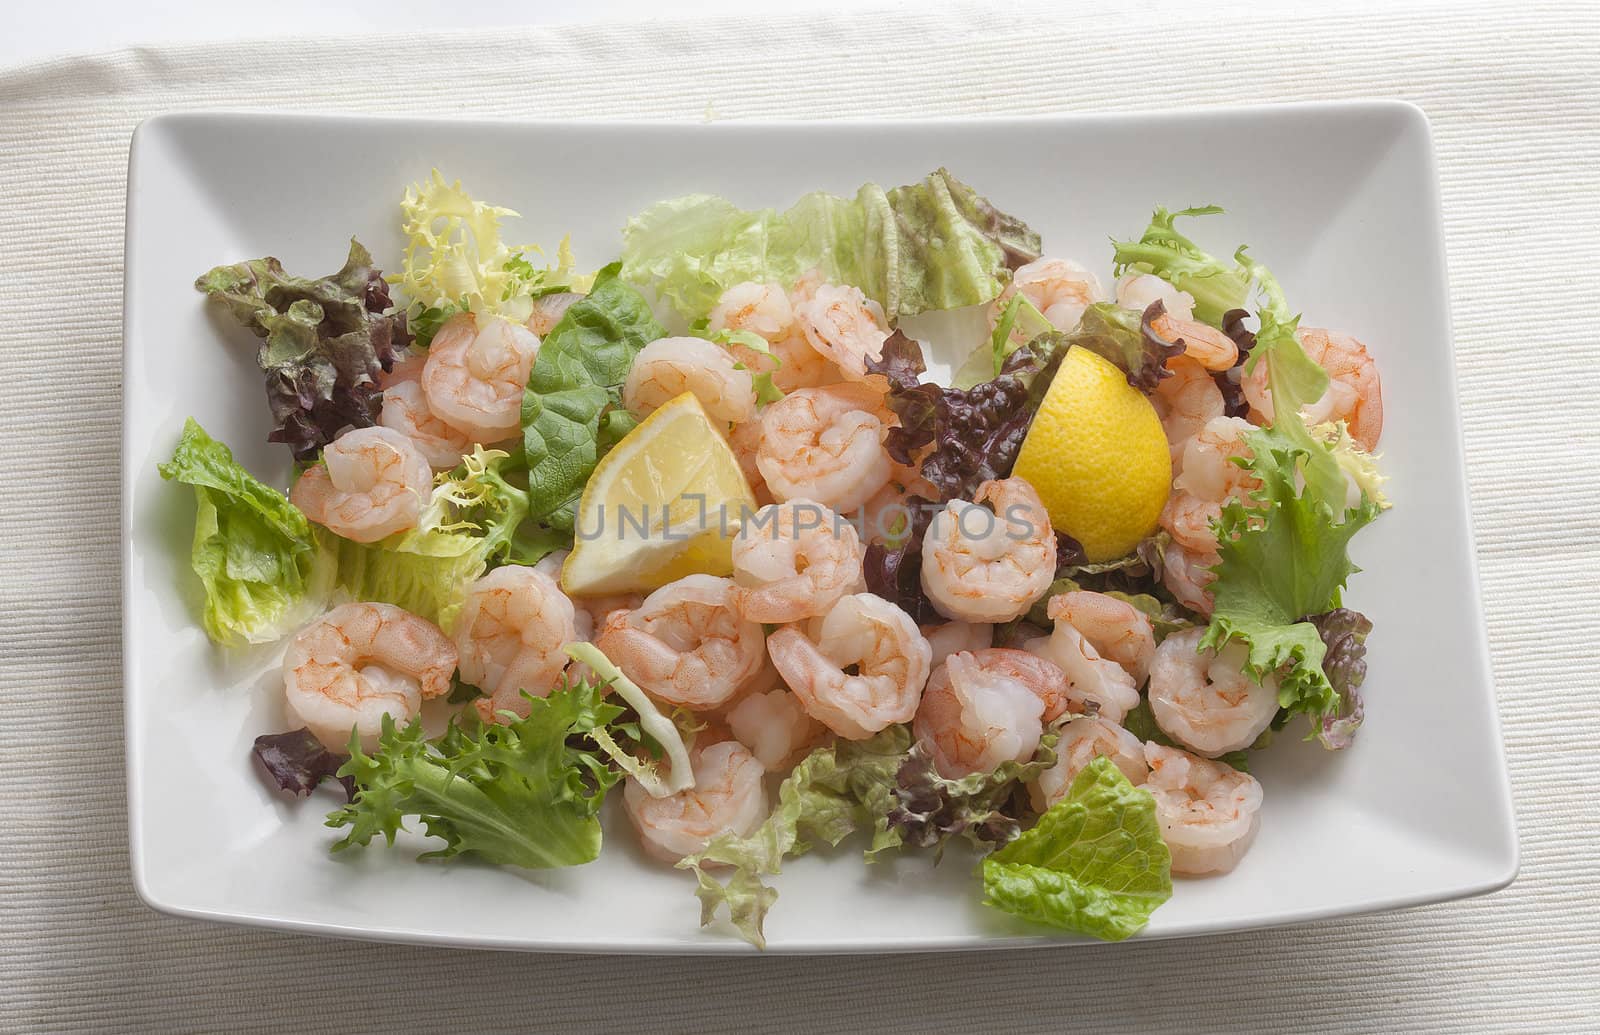 Boiled shrimp's tails with lemon and lettuce on the white plate